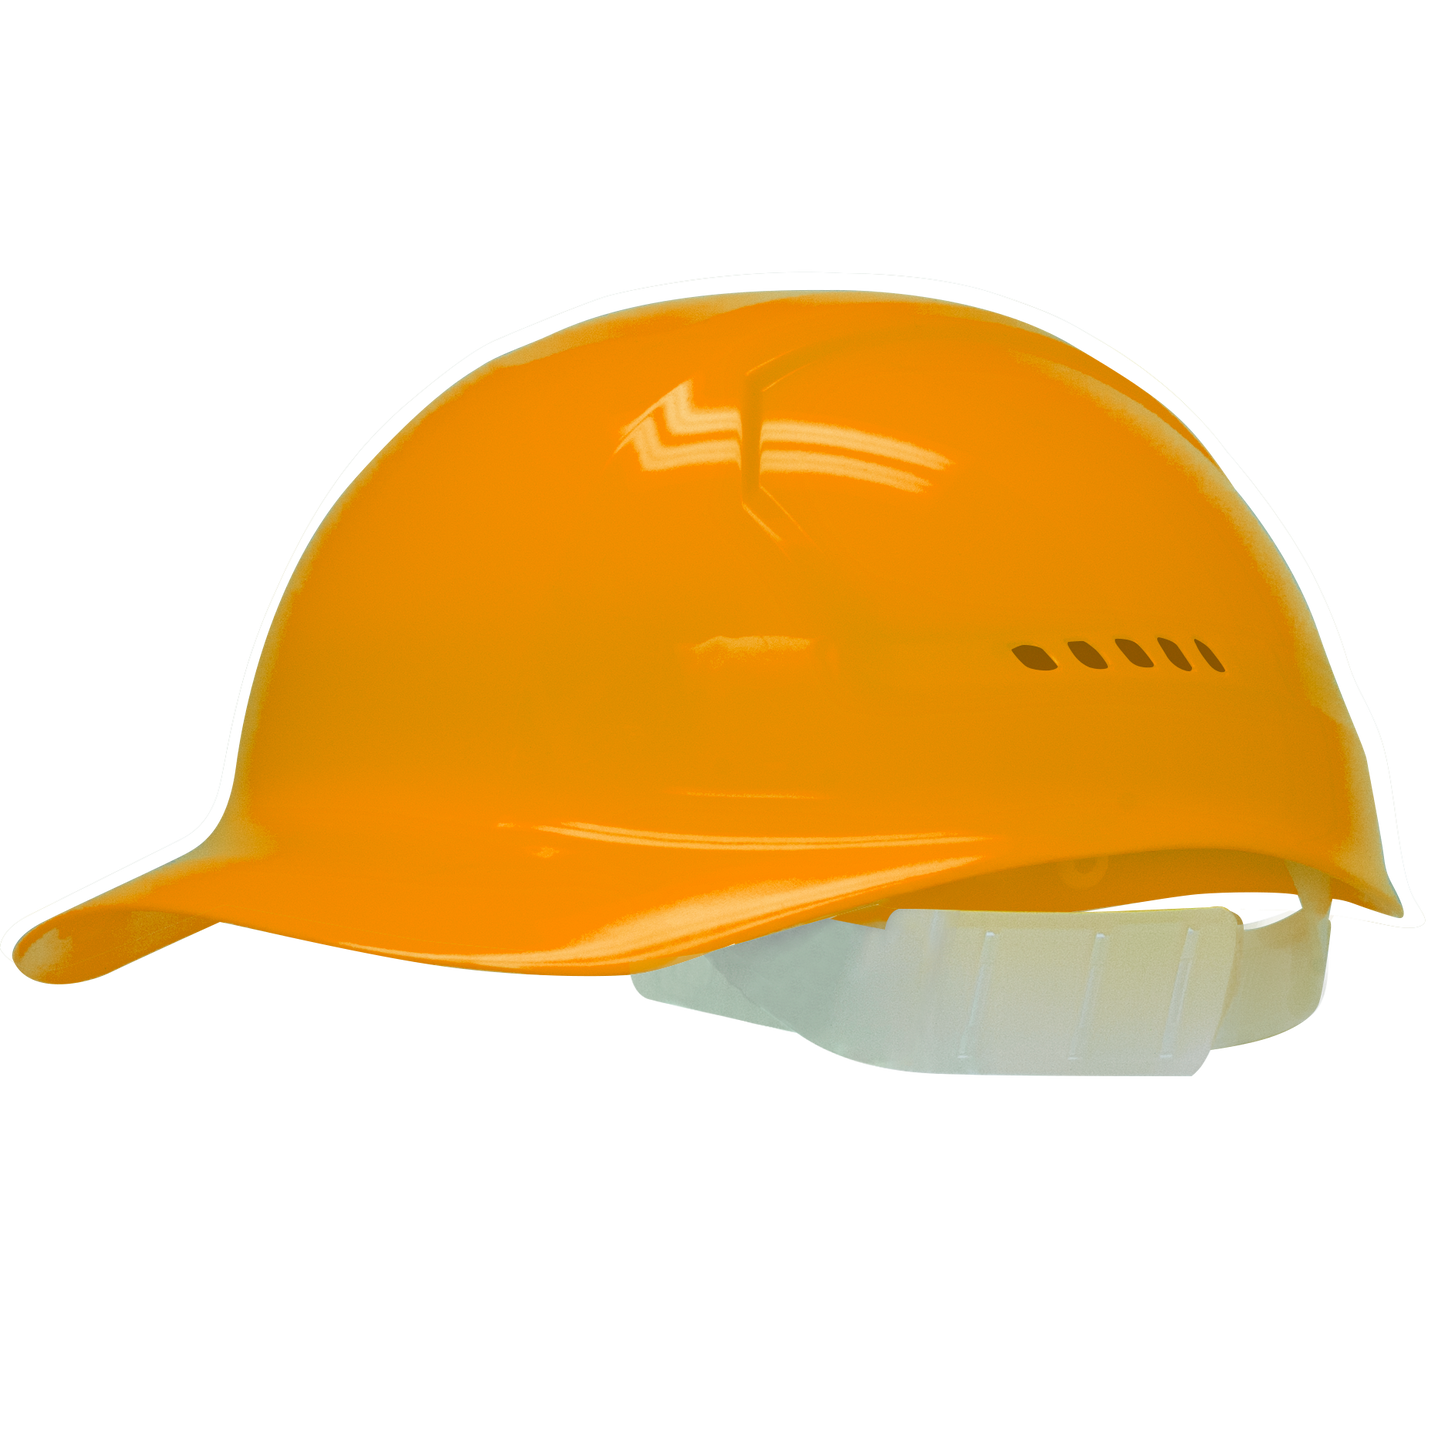 Vented Bump Cap Hard Hat with Brow Pad, 4-Point Plastic Suspension